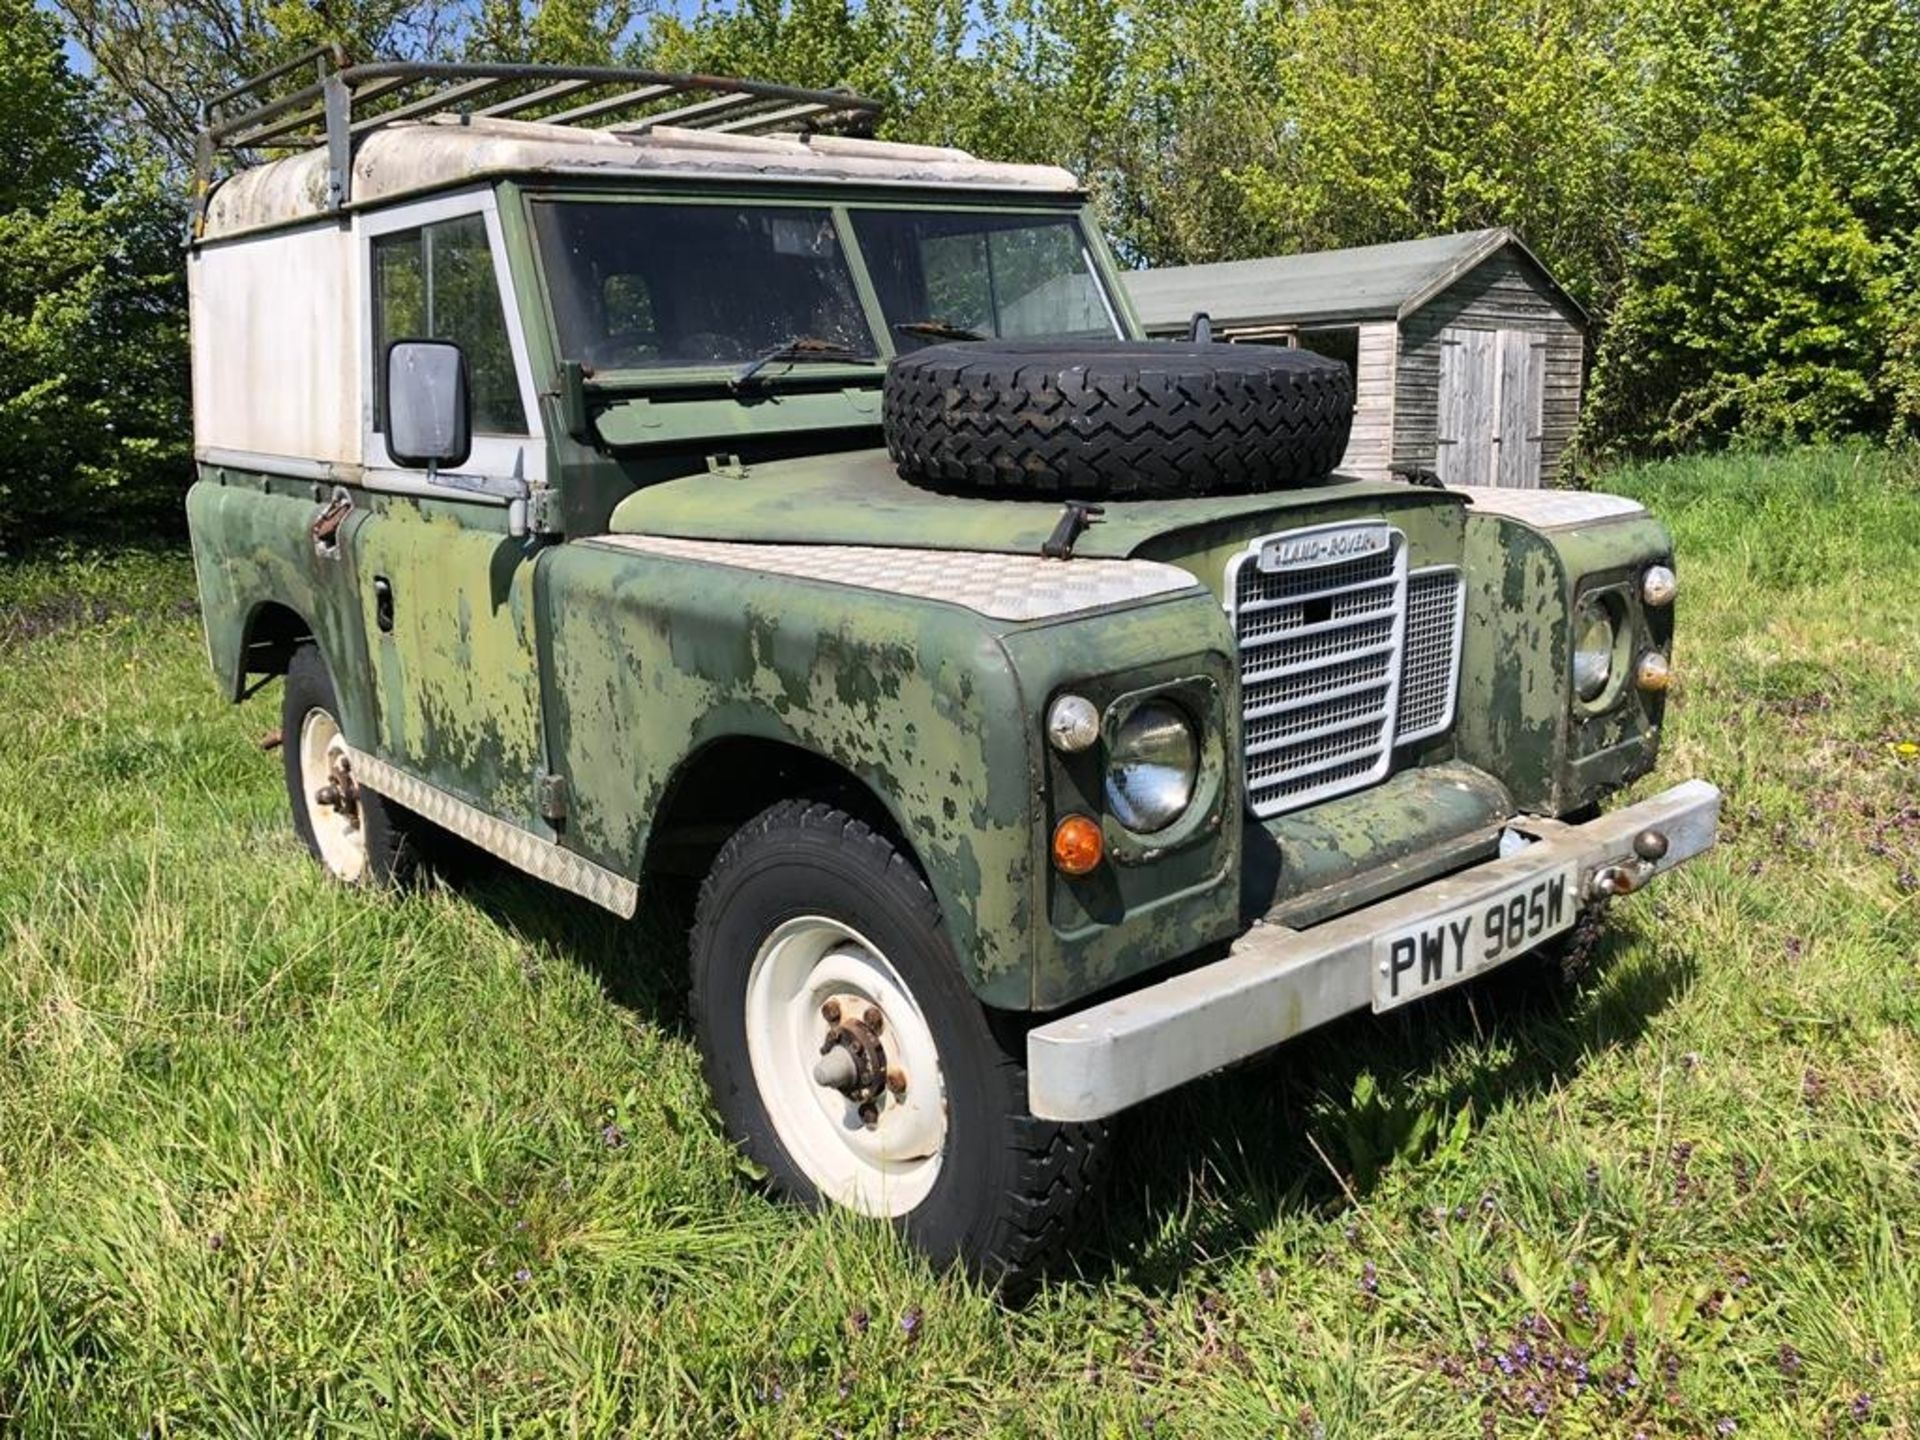 1980 Land Rover Series 3 88 inch Registration number PWY 985W Galvanised chassis and recent bulkhead